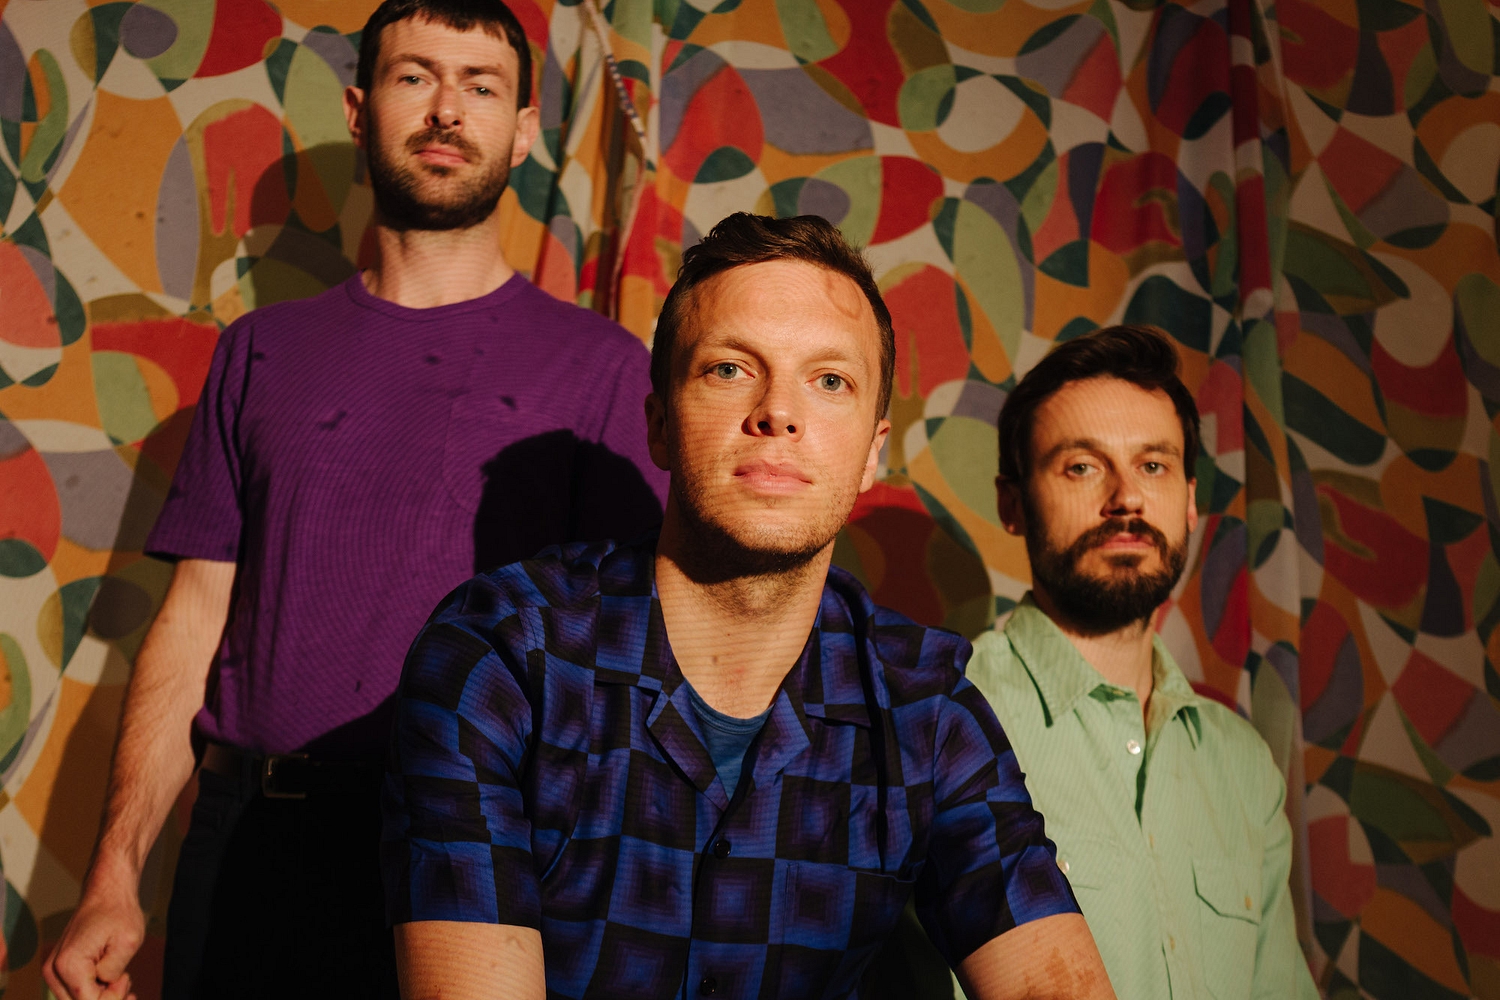 Friendly Fires to reissue their debut album for 15th anniversary